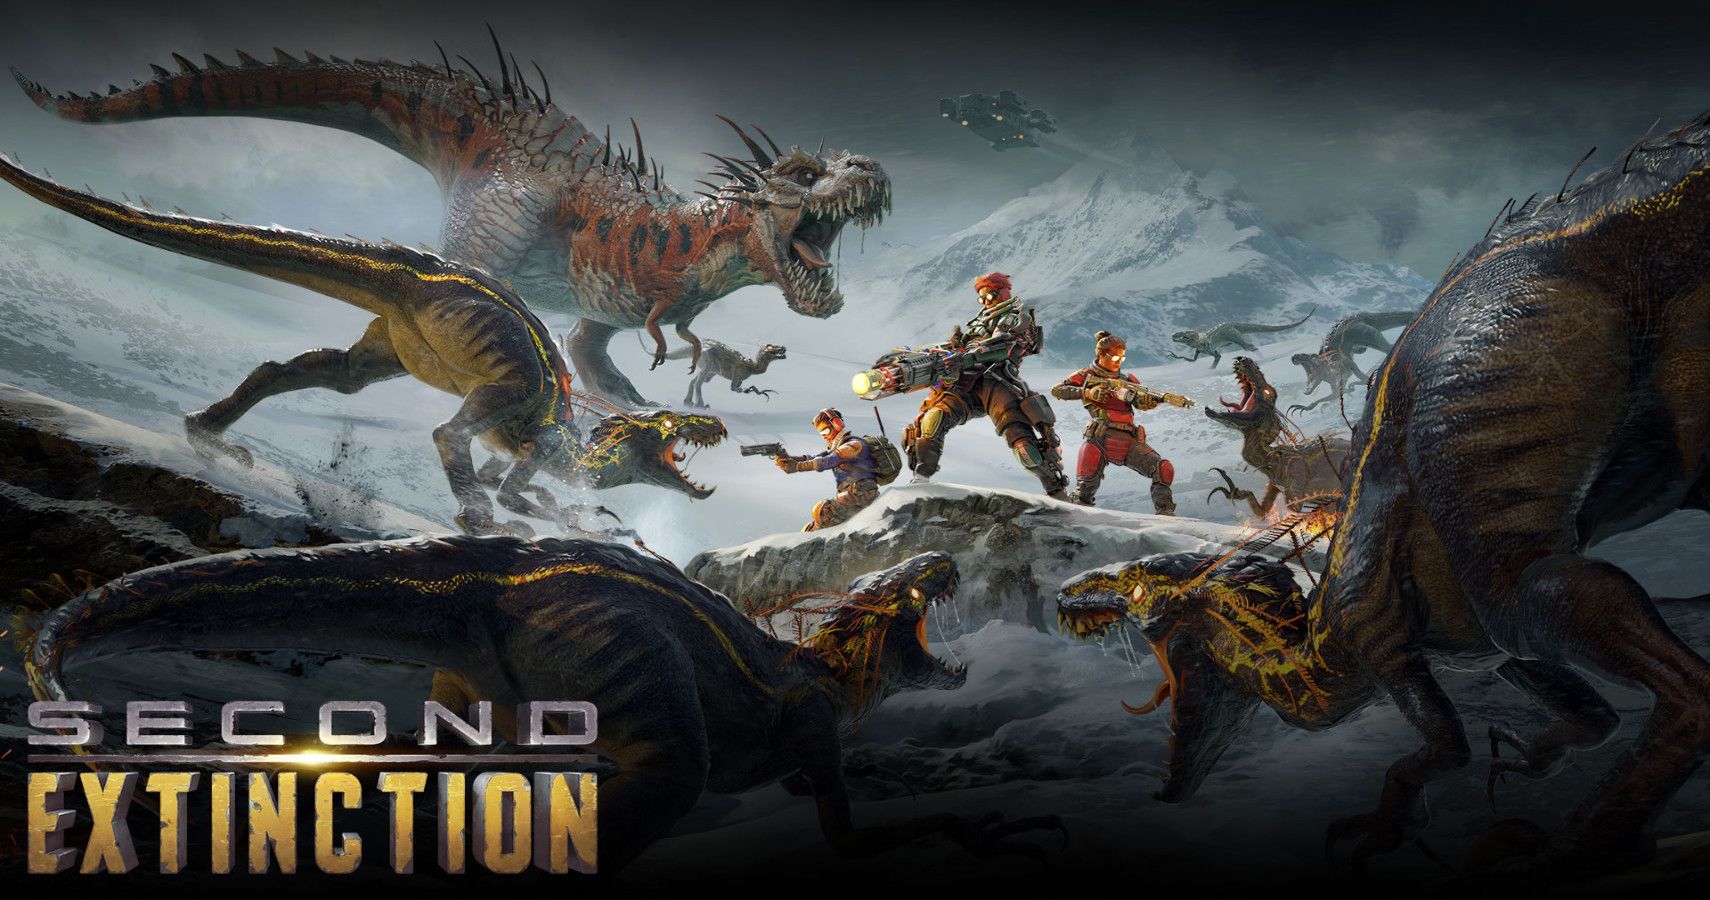 Dinosaur Shooter Second Extinction Comes To Xbox Game Pass This April